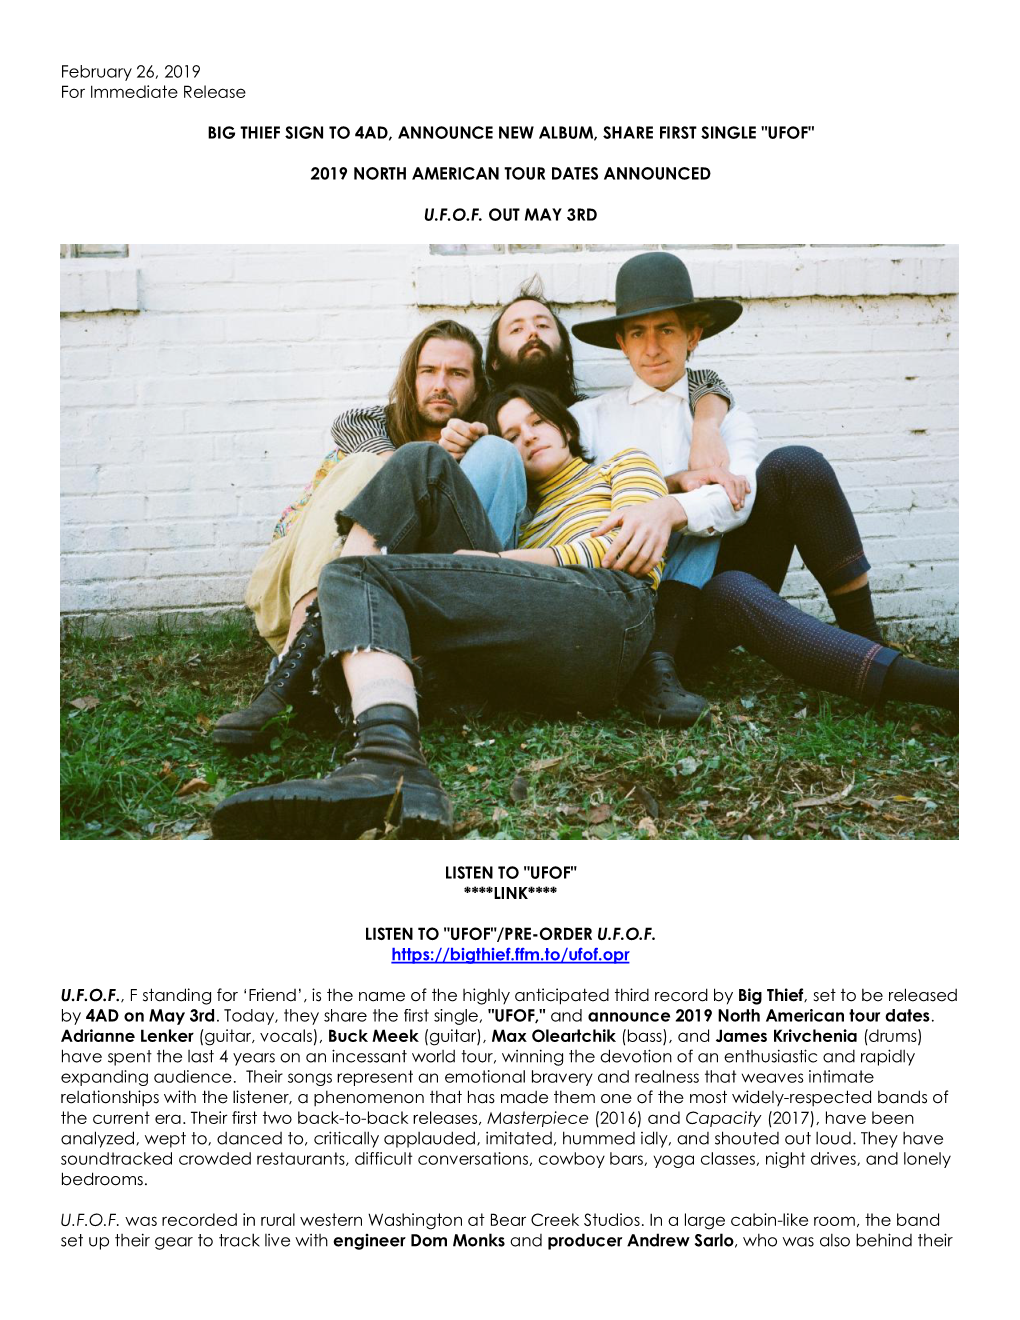 February 26, 2019 for Immediate Release BIG THIEF SIGN to 4AD